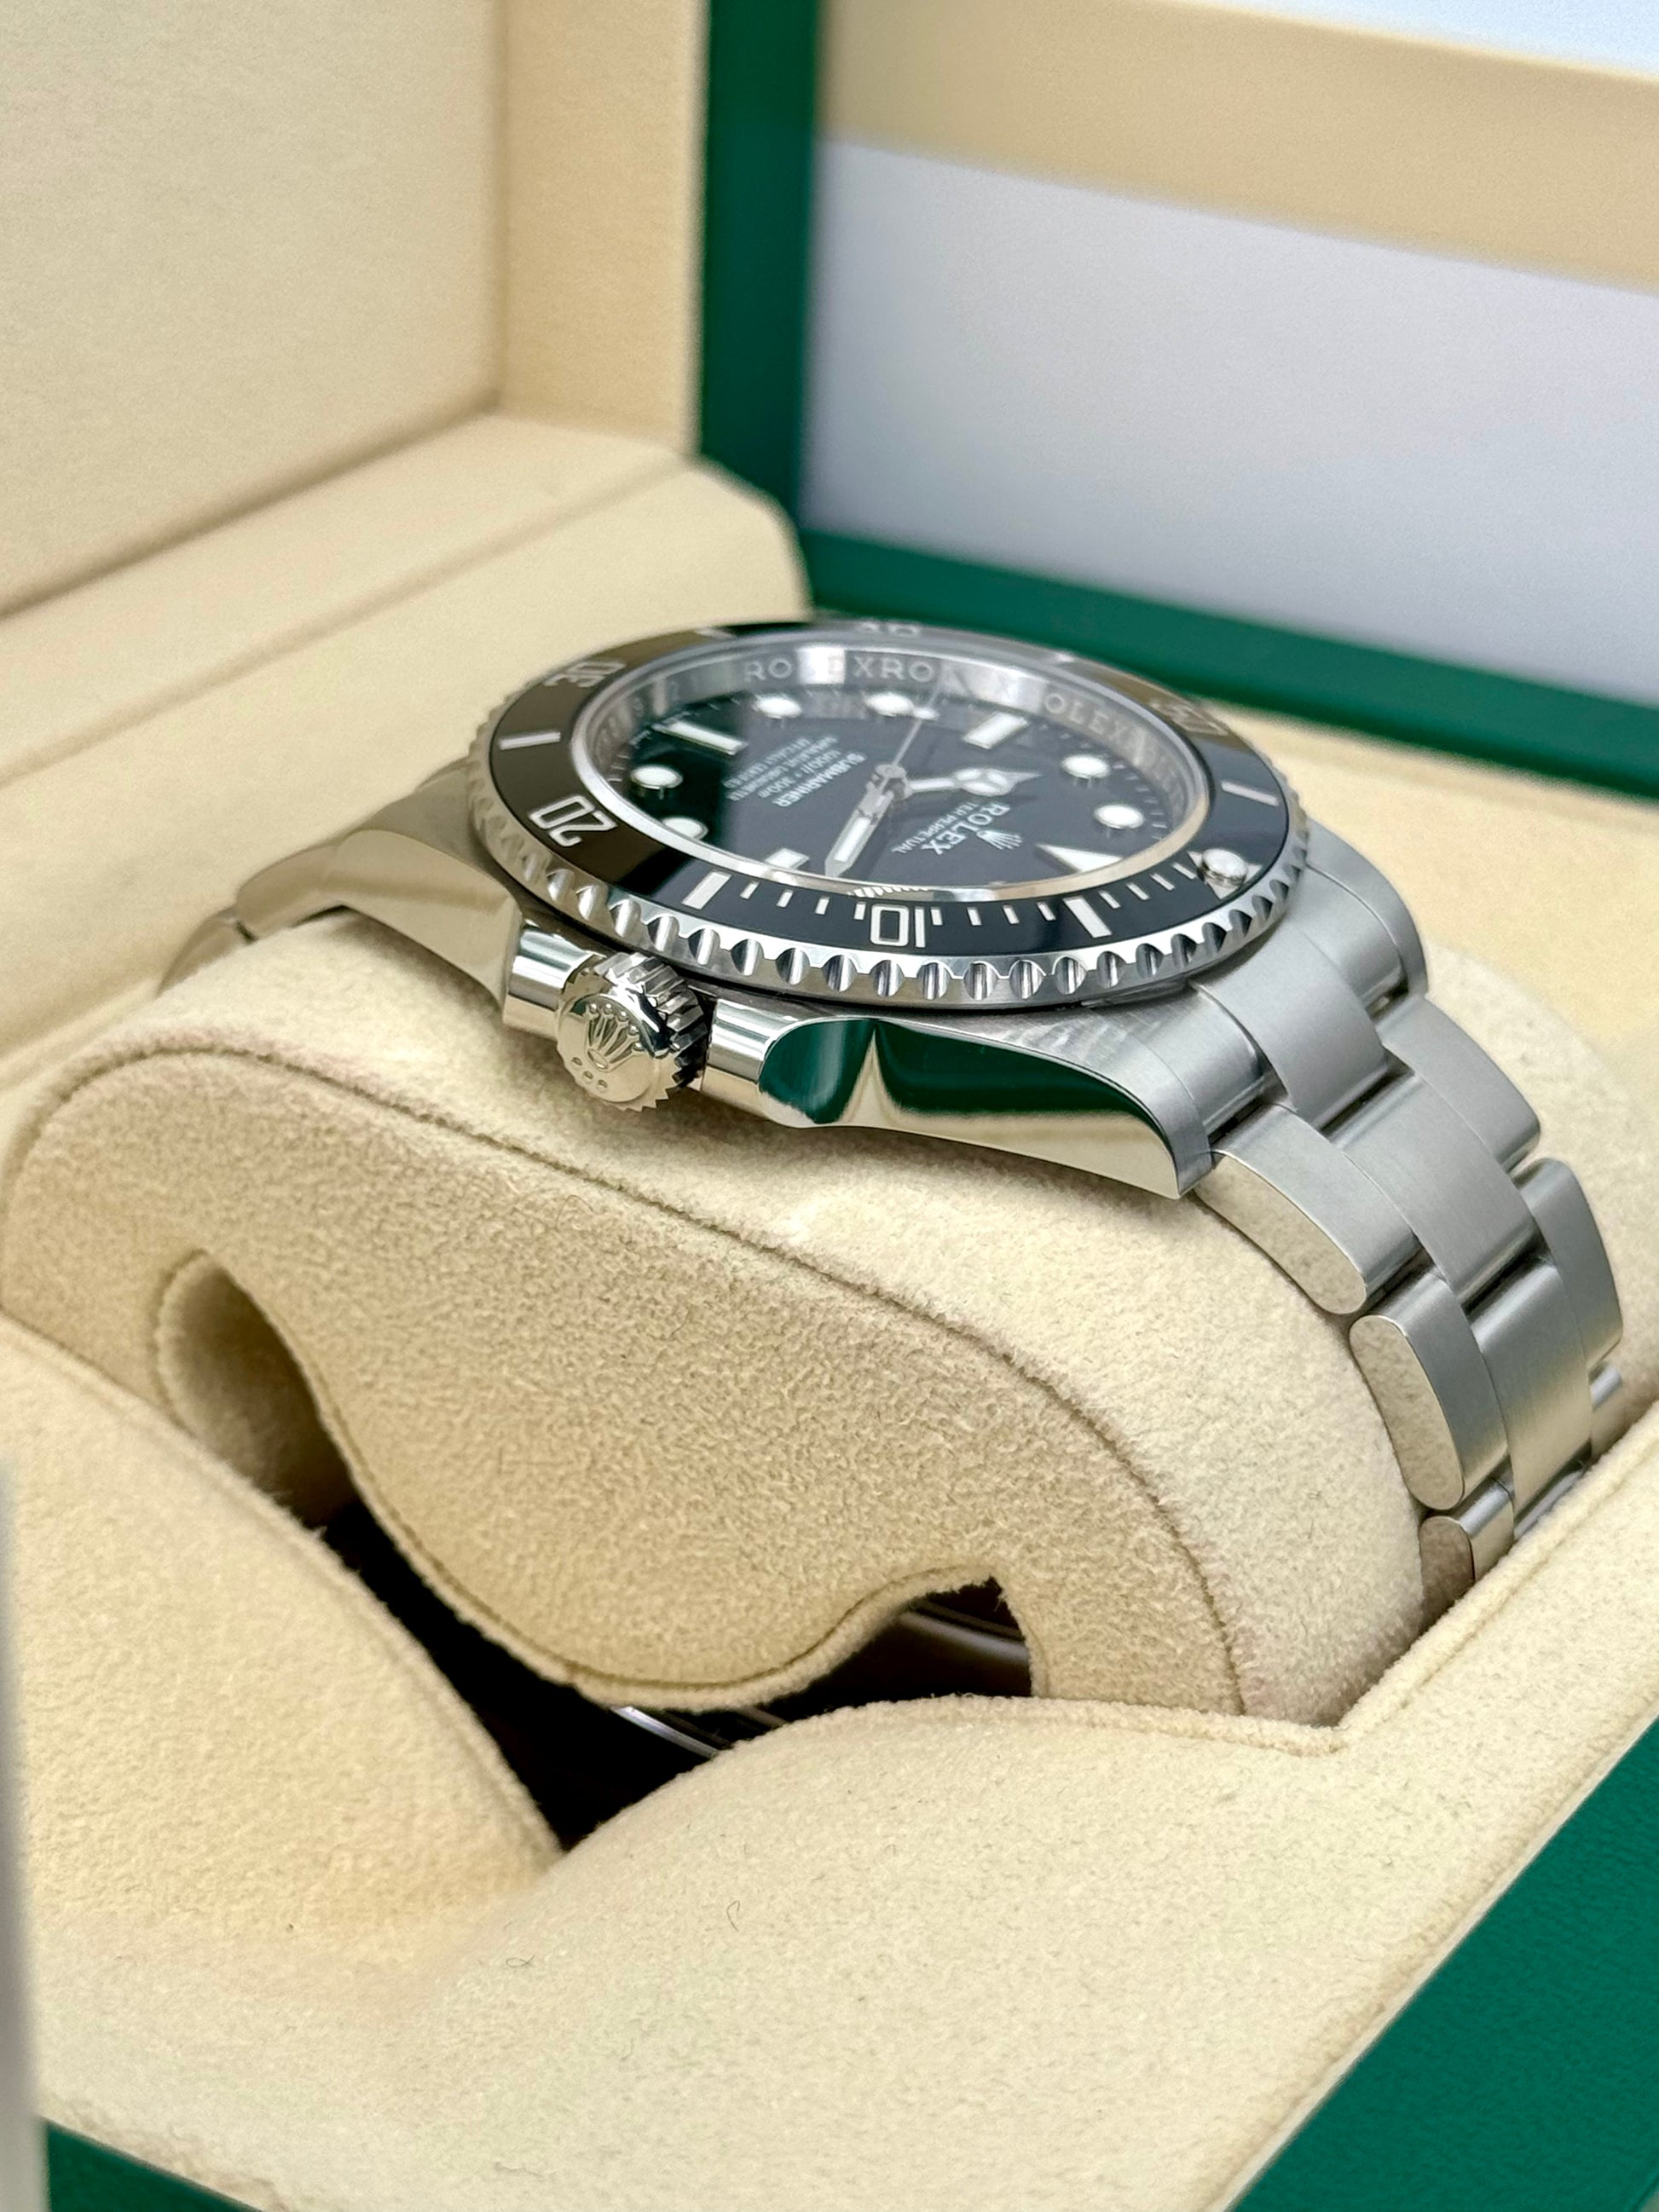 NEW 2023 Rolex Submariner 41mm 124060 Stainless Steel Black Dial - MyWatchLLC